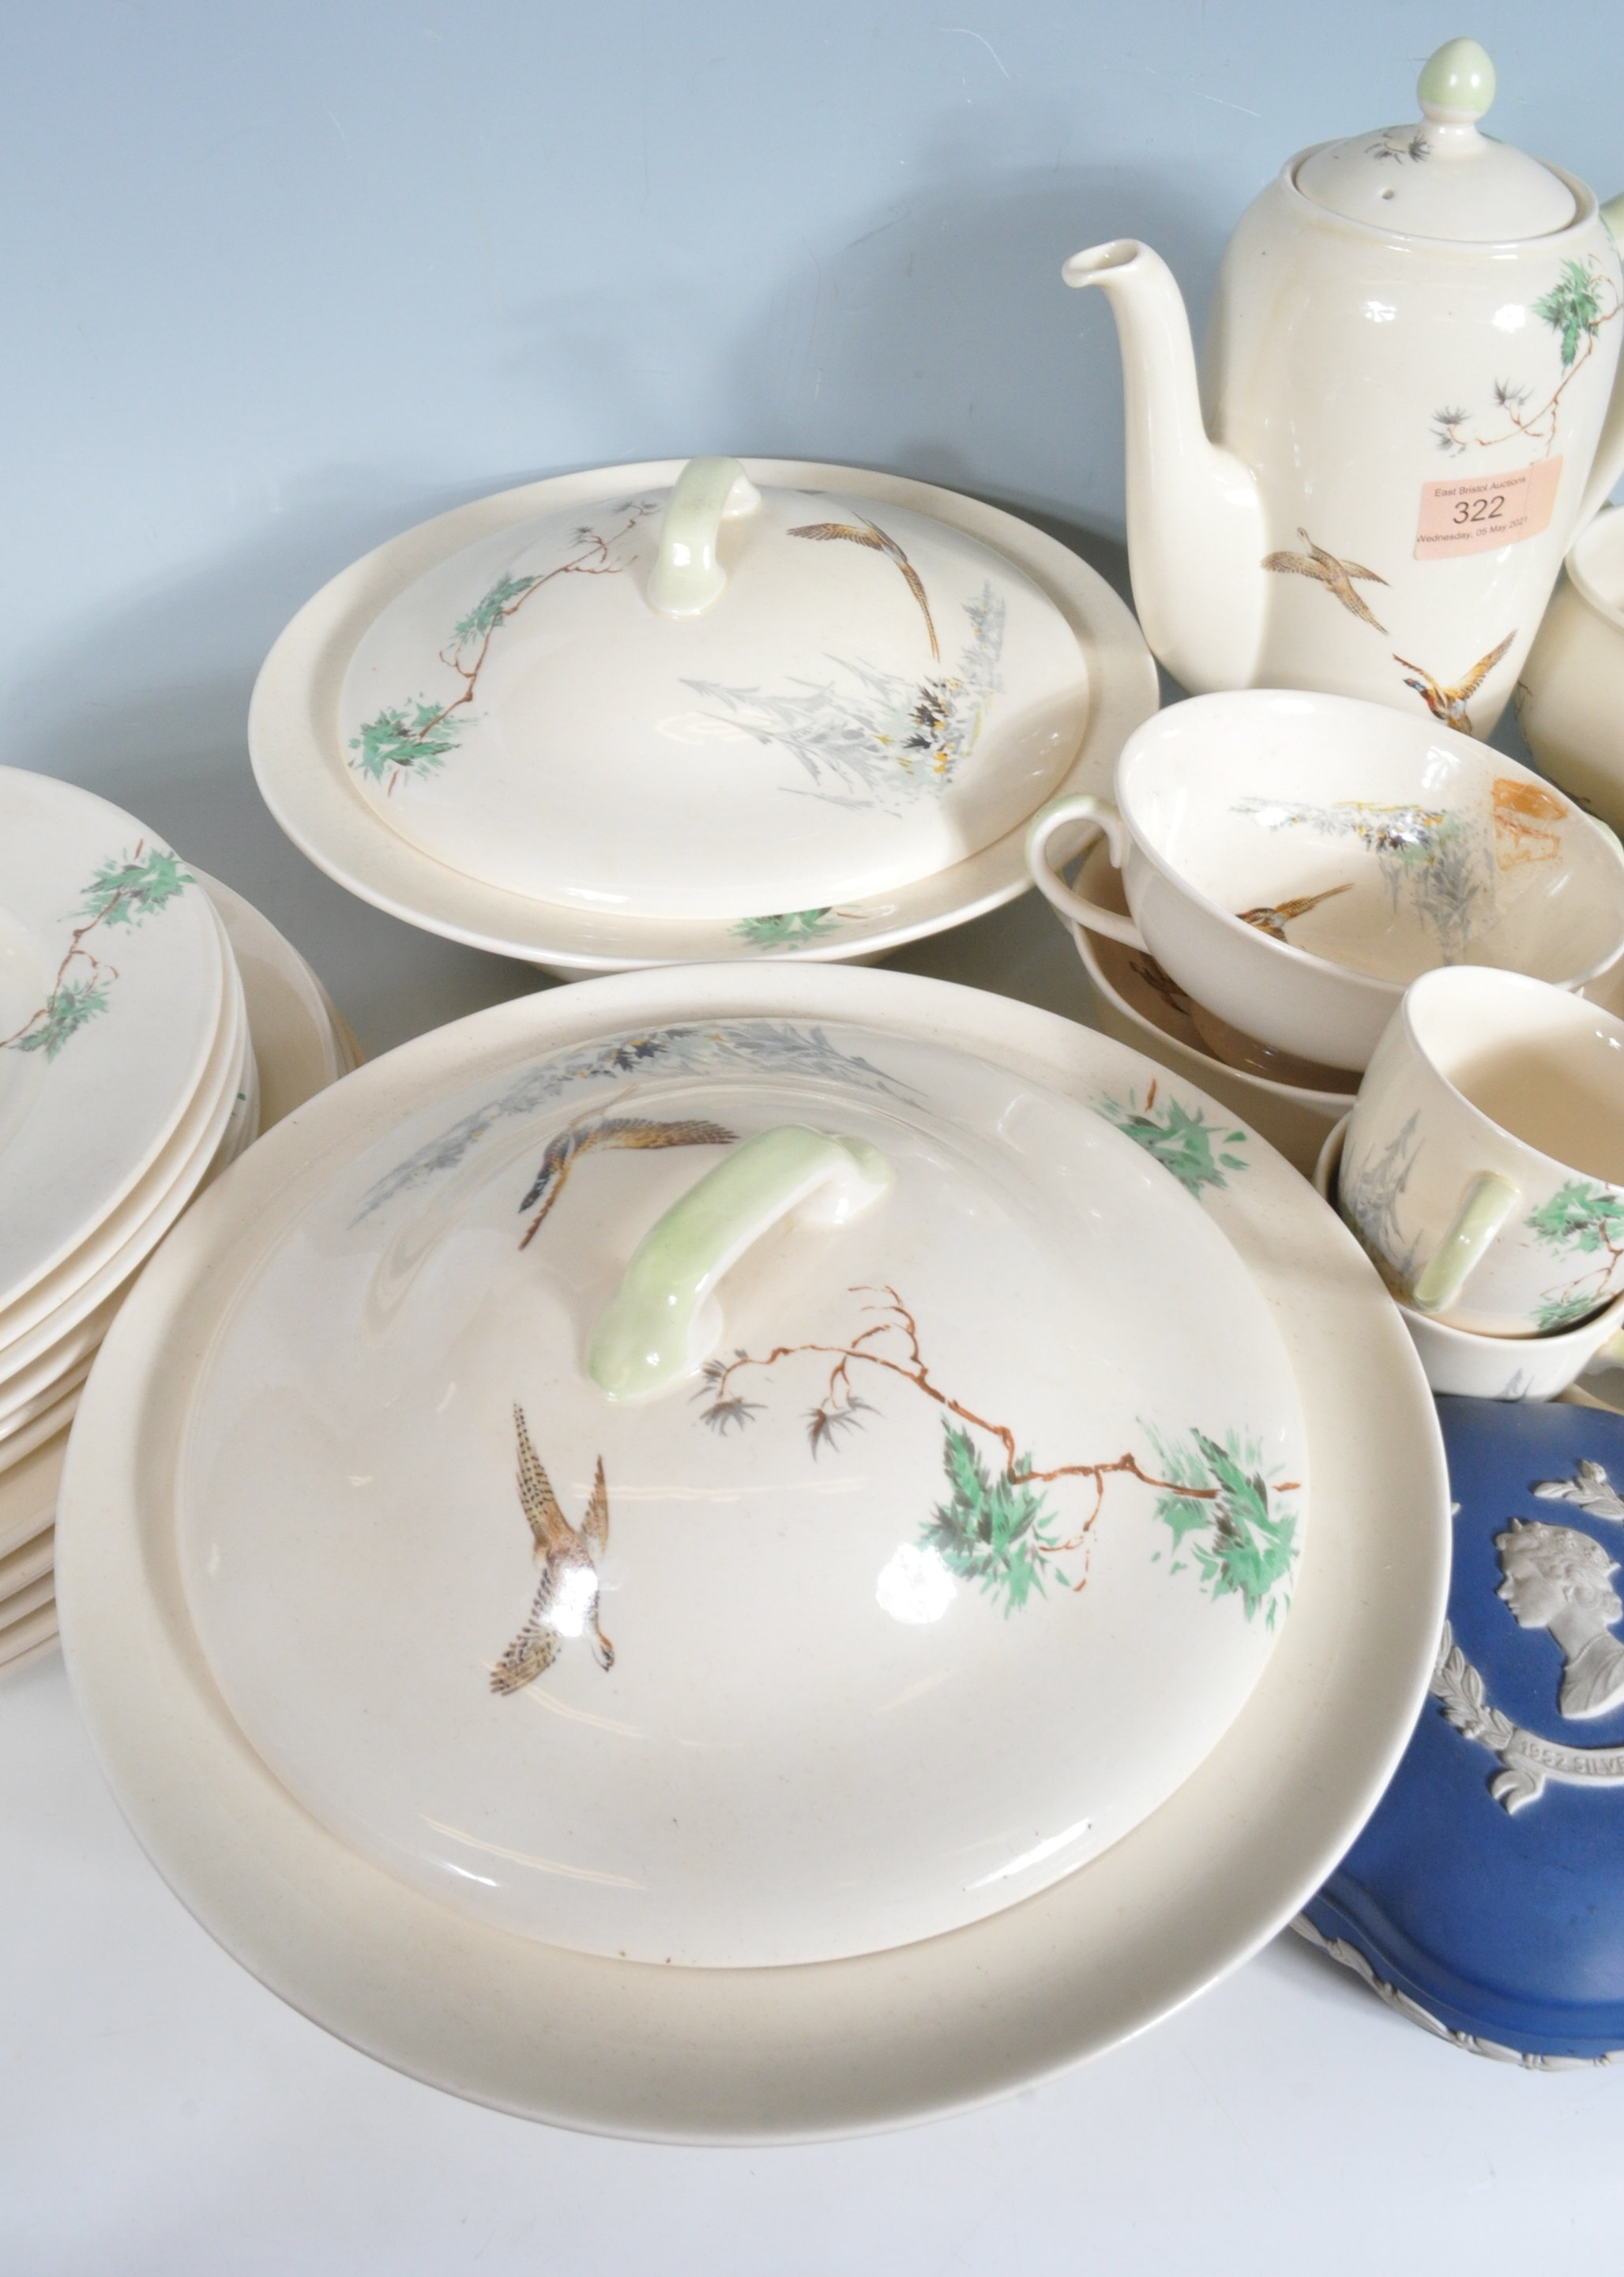 ROYAL DOULTON COPPICE PATTERN DINNER SERVICE - Image 7 of 11